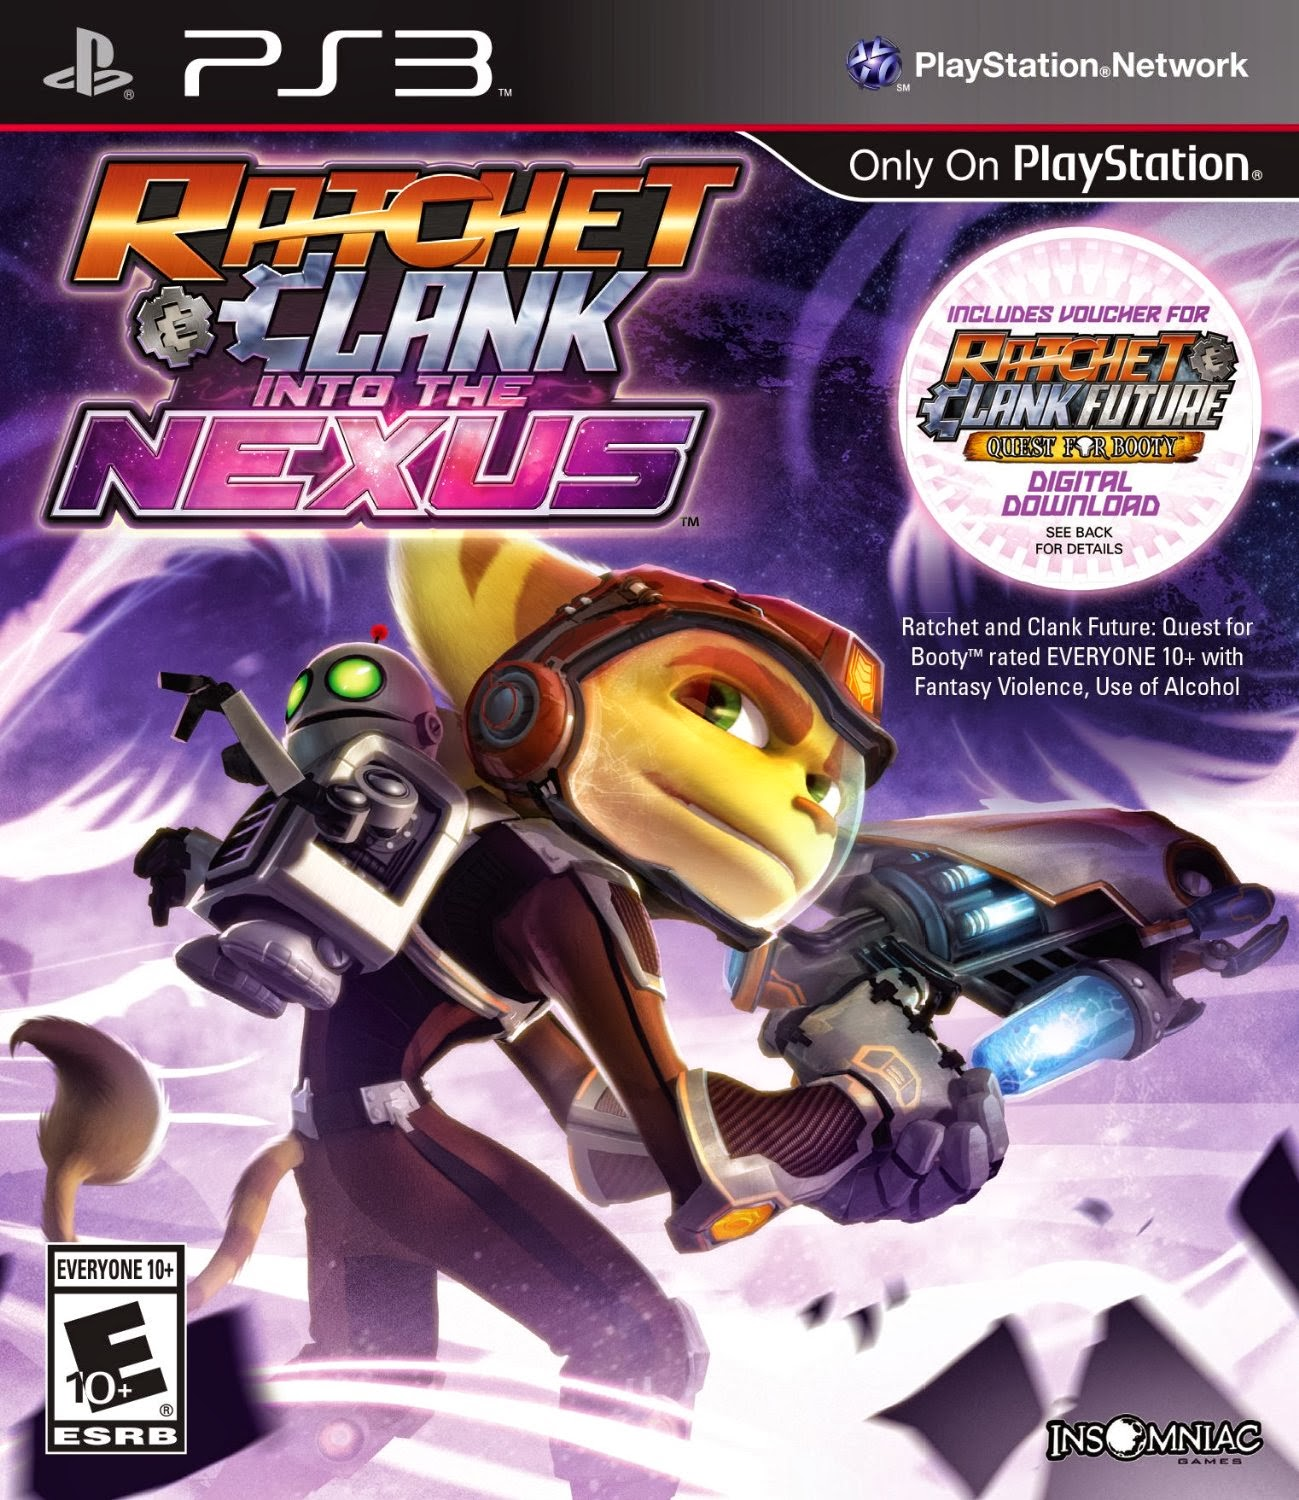 Video Games Review: Ratchet & Clank (PS4, 2016) - The AU Review